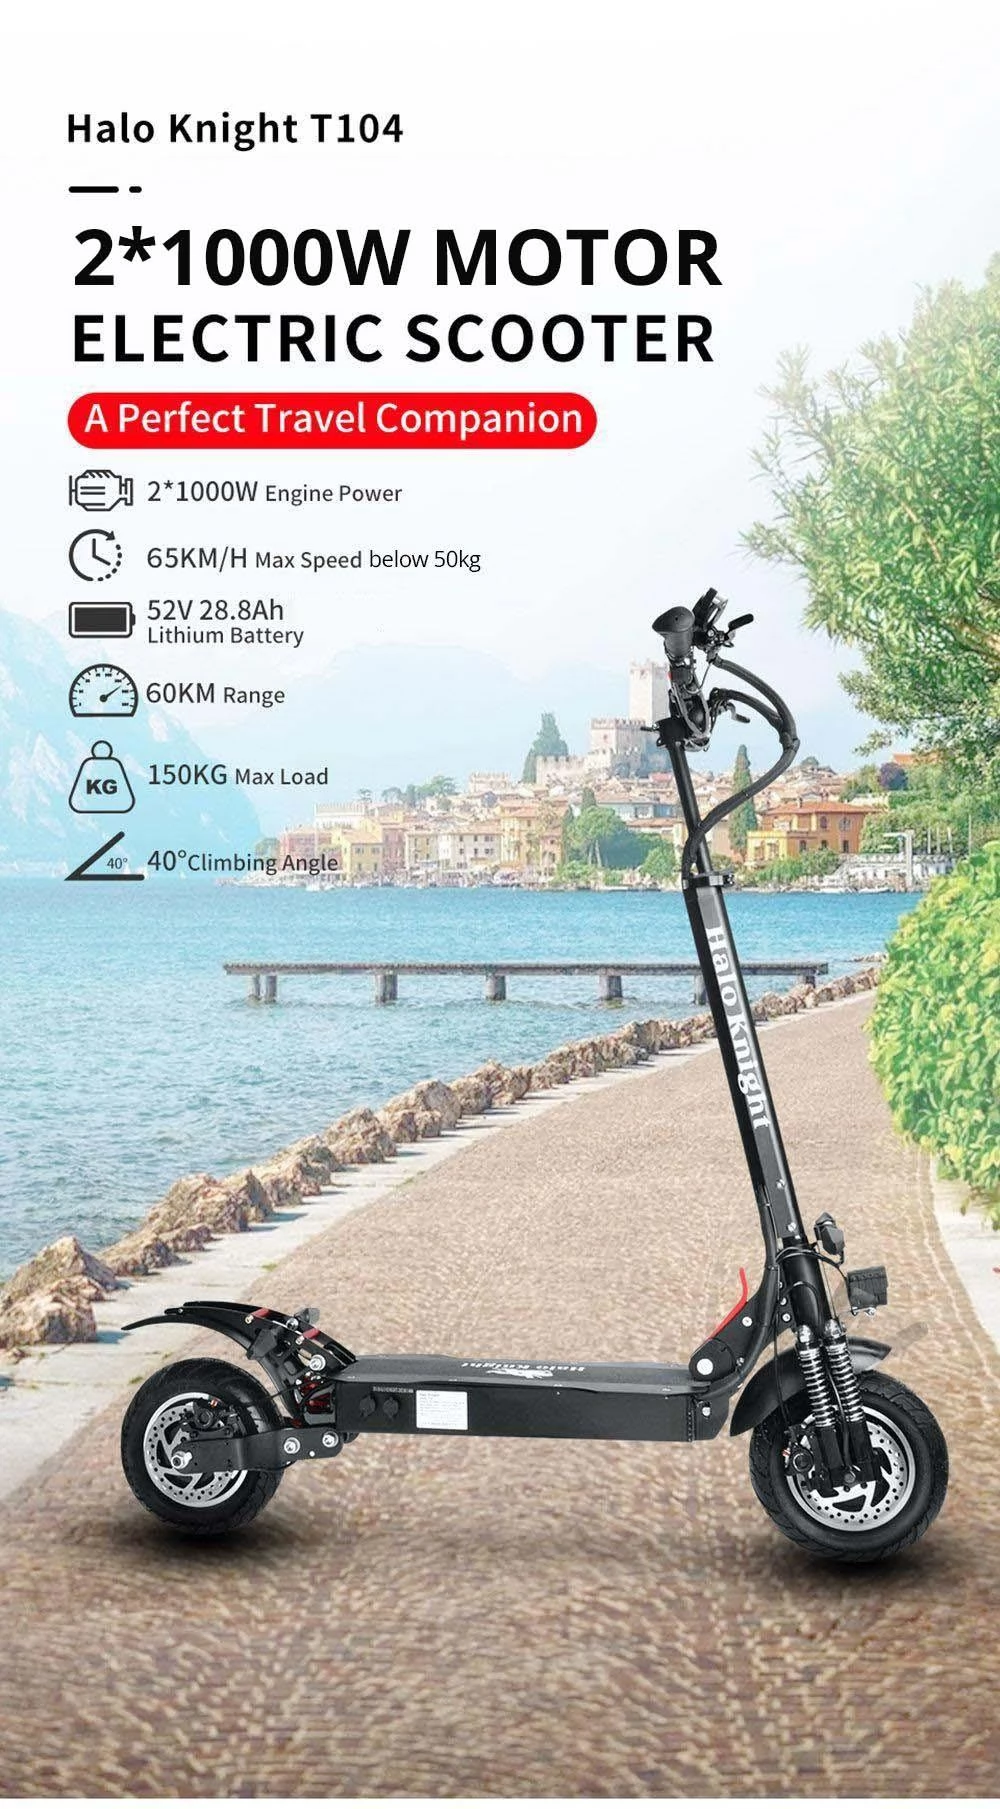 Halo Knight T104 10 Inch Pneumatic Tire Foldable Road/Off Road Electric Scooter - 52V 2000W Motor & 28Ah Battery